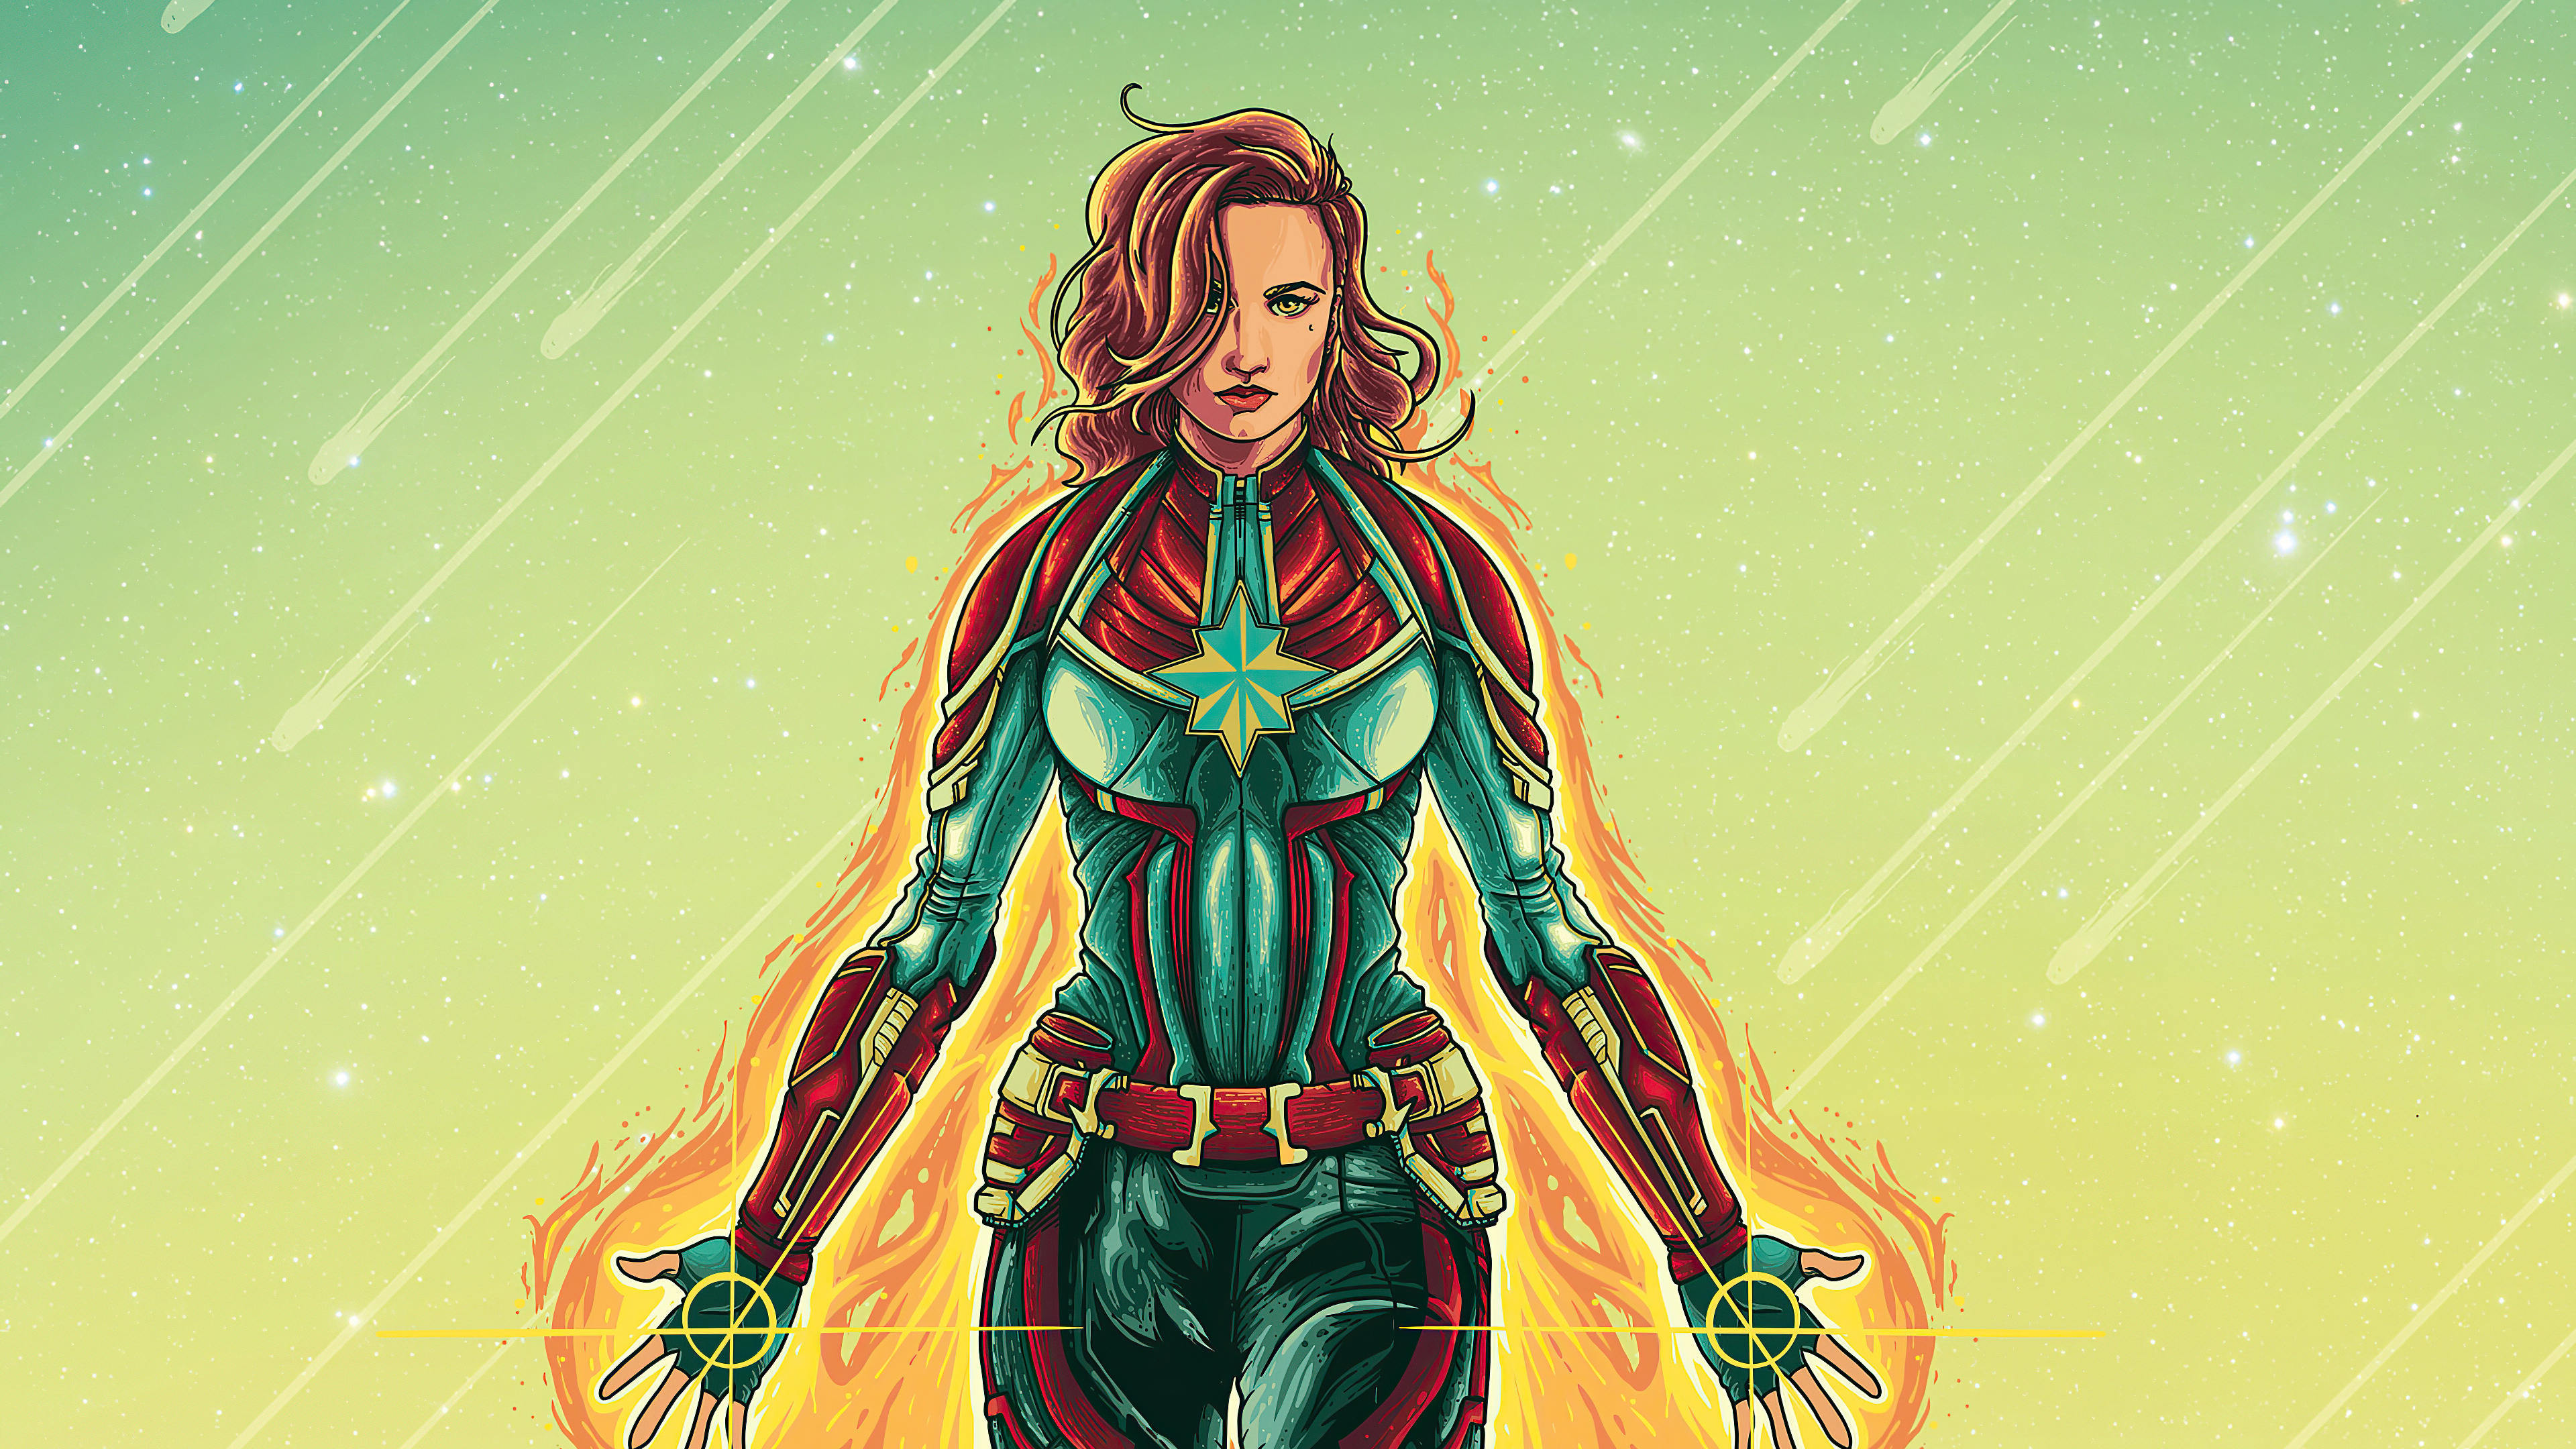 Captain Marvel 4K 2019 Wallpapers  HD Wallpapers  ID 27568